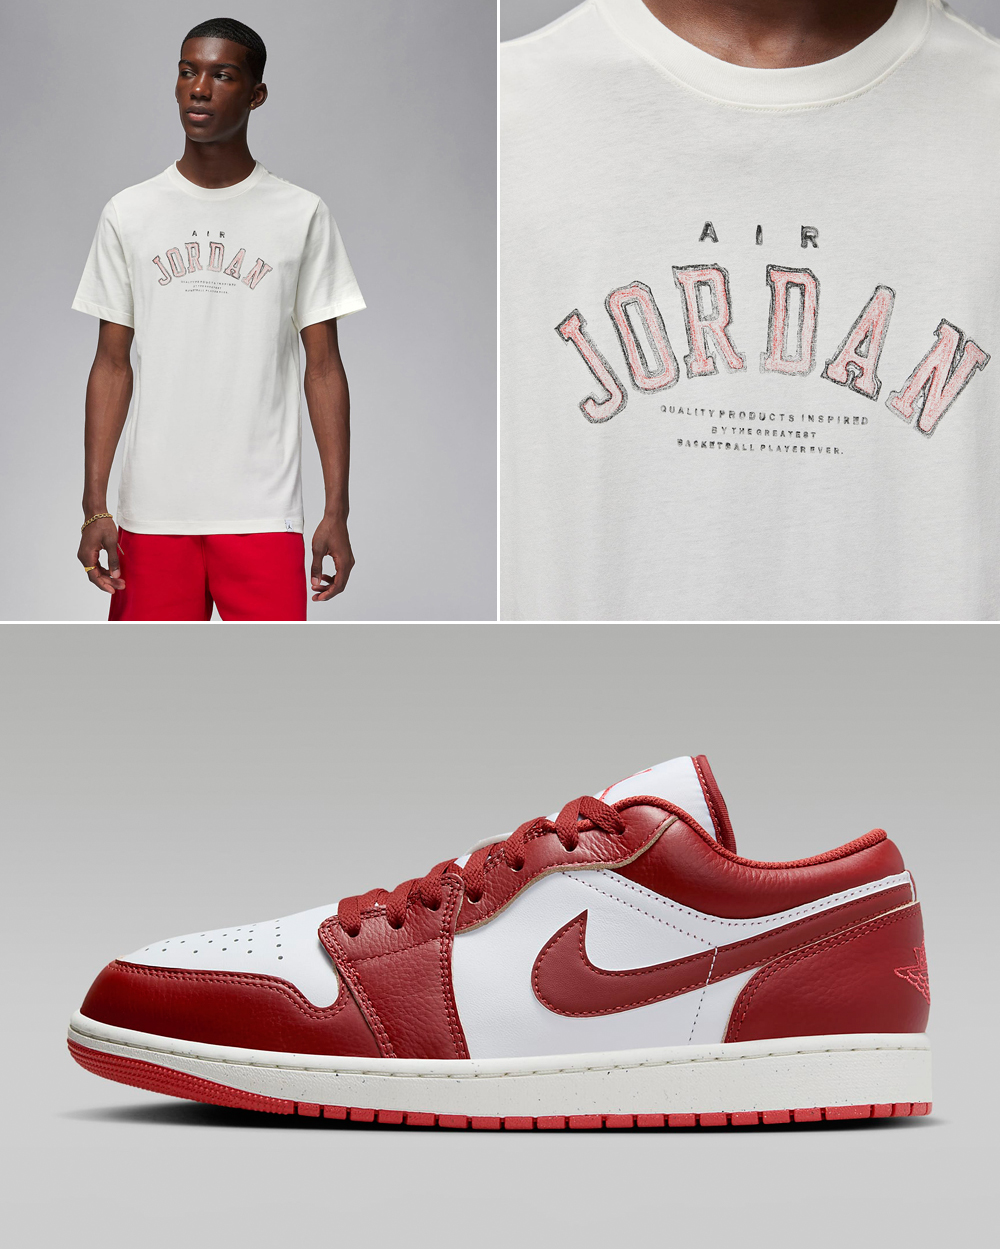 Air-Jordan-1-Low-SE-White-Lobster-Dune-Red-T-Shirt-Outfit